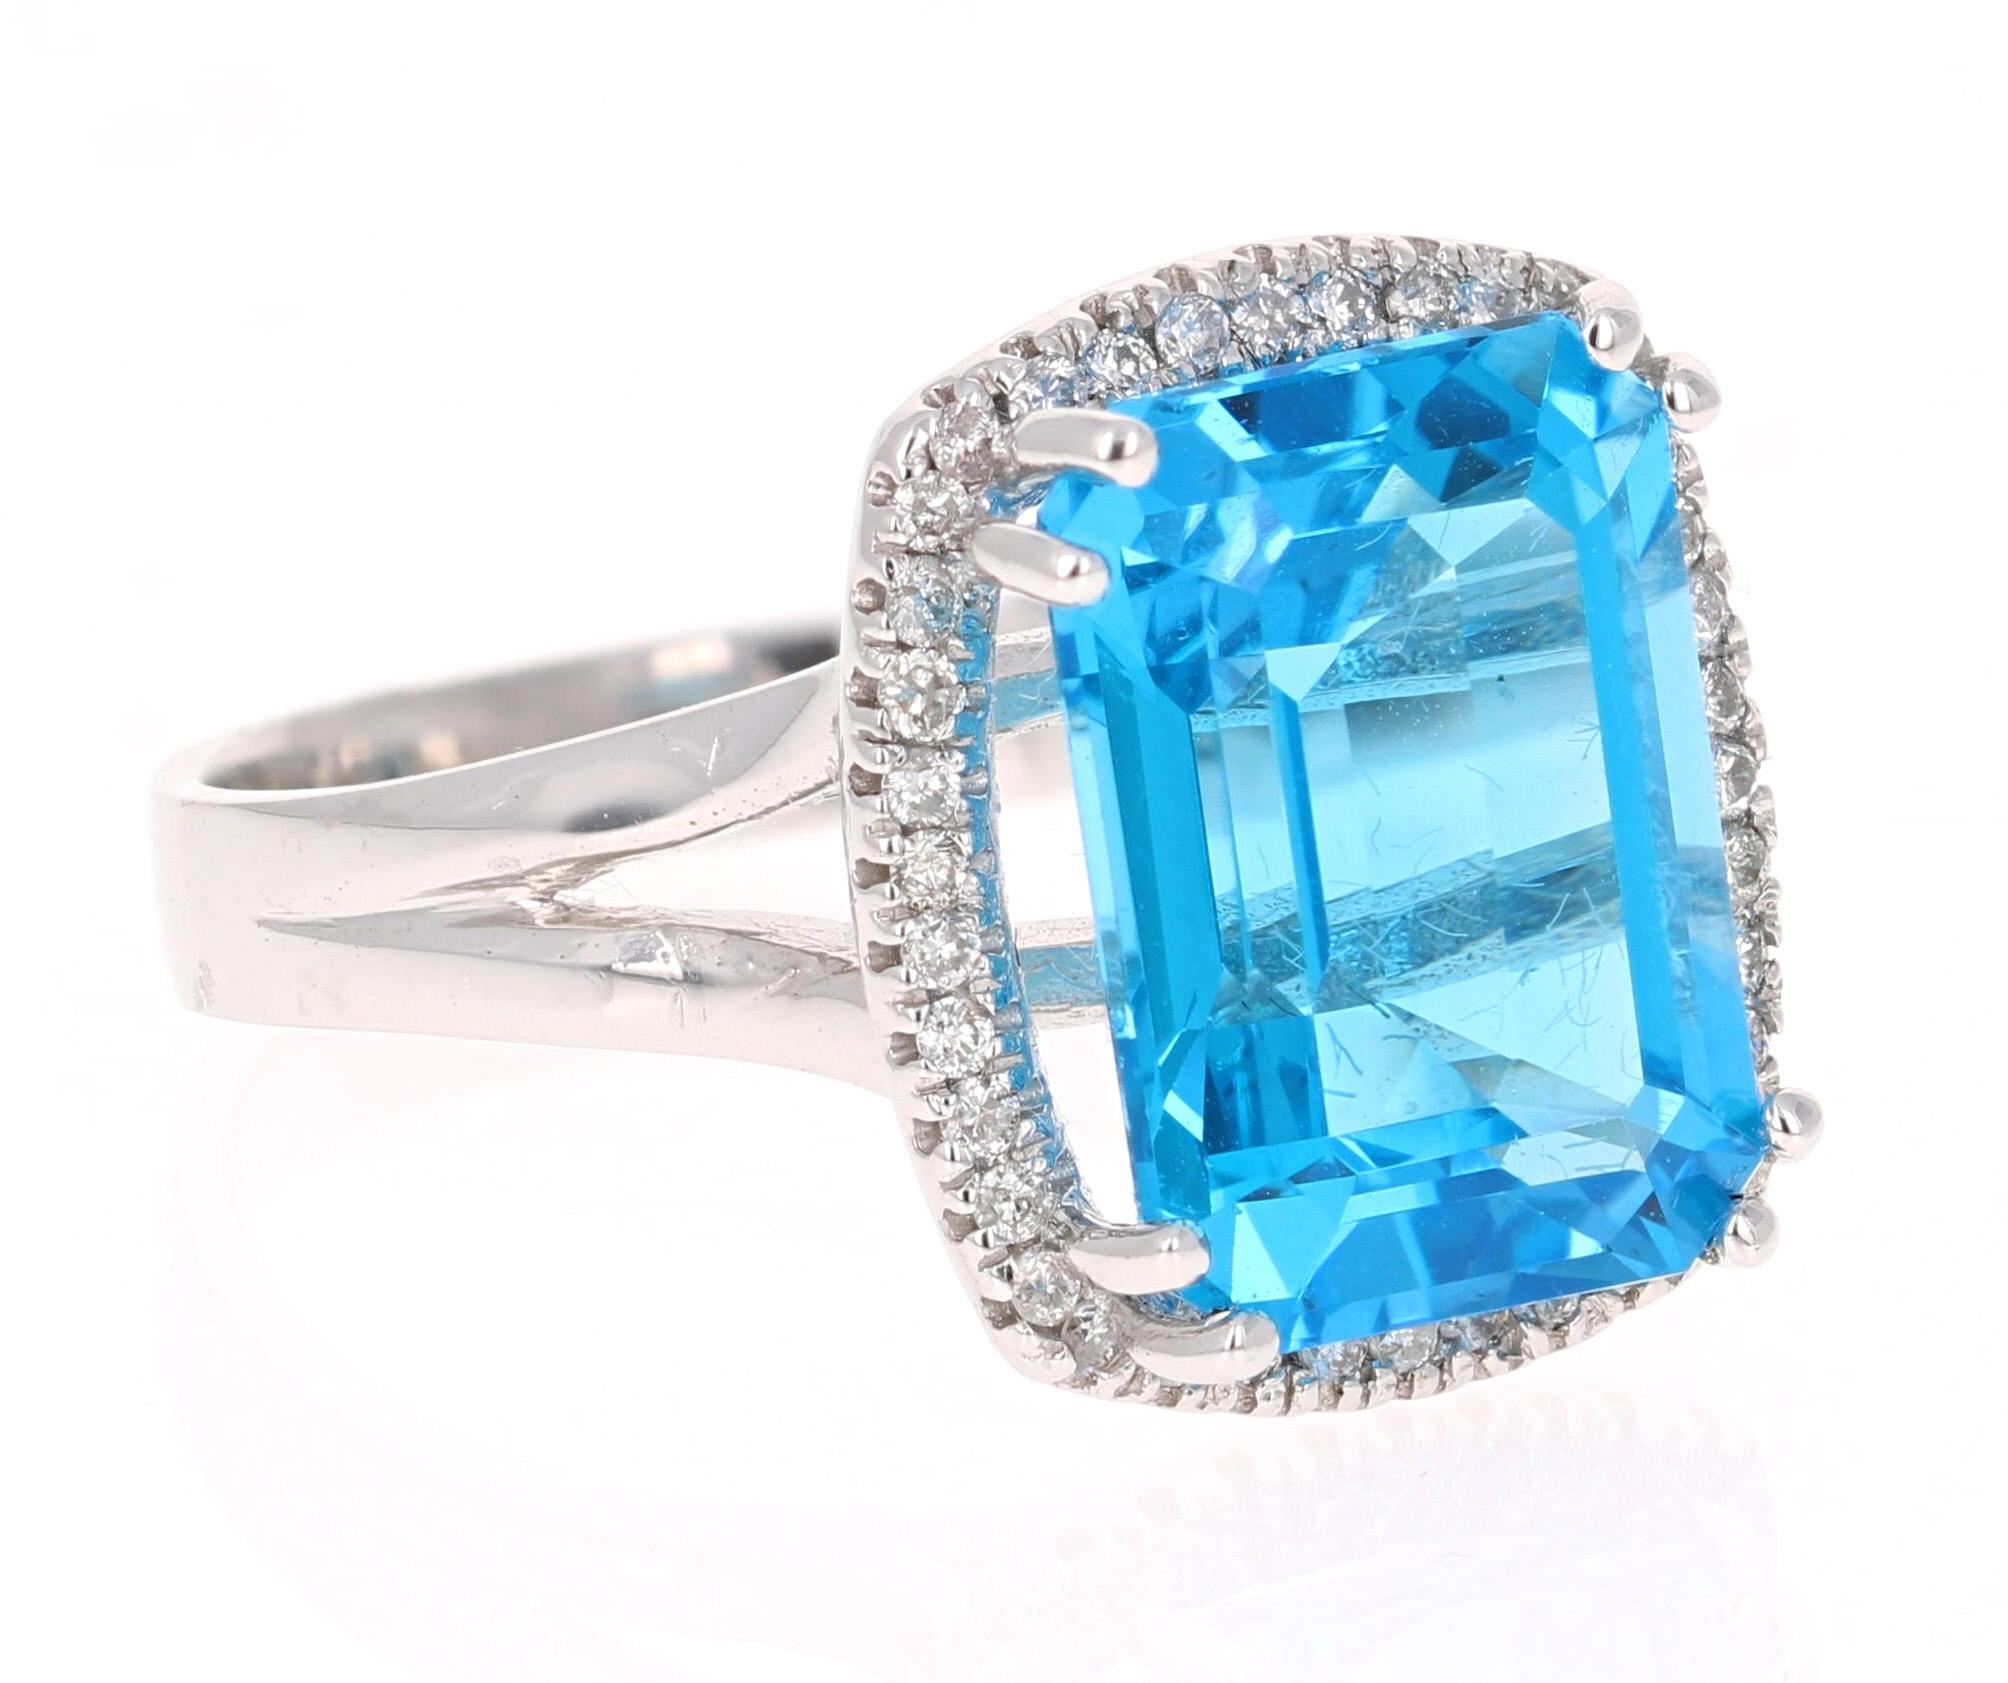 This beautiful Emerald Cut Blue Topaz and Diamond ring has a simple but stunning large Blue Topaz that weighs 9.44 Carats. It is surrounded by 38  Round Cut Diamonds that weigh 0.27 Carats. The total carat weight of the ring is 9.44 Carats. 
The